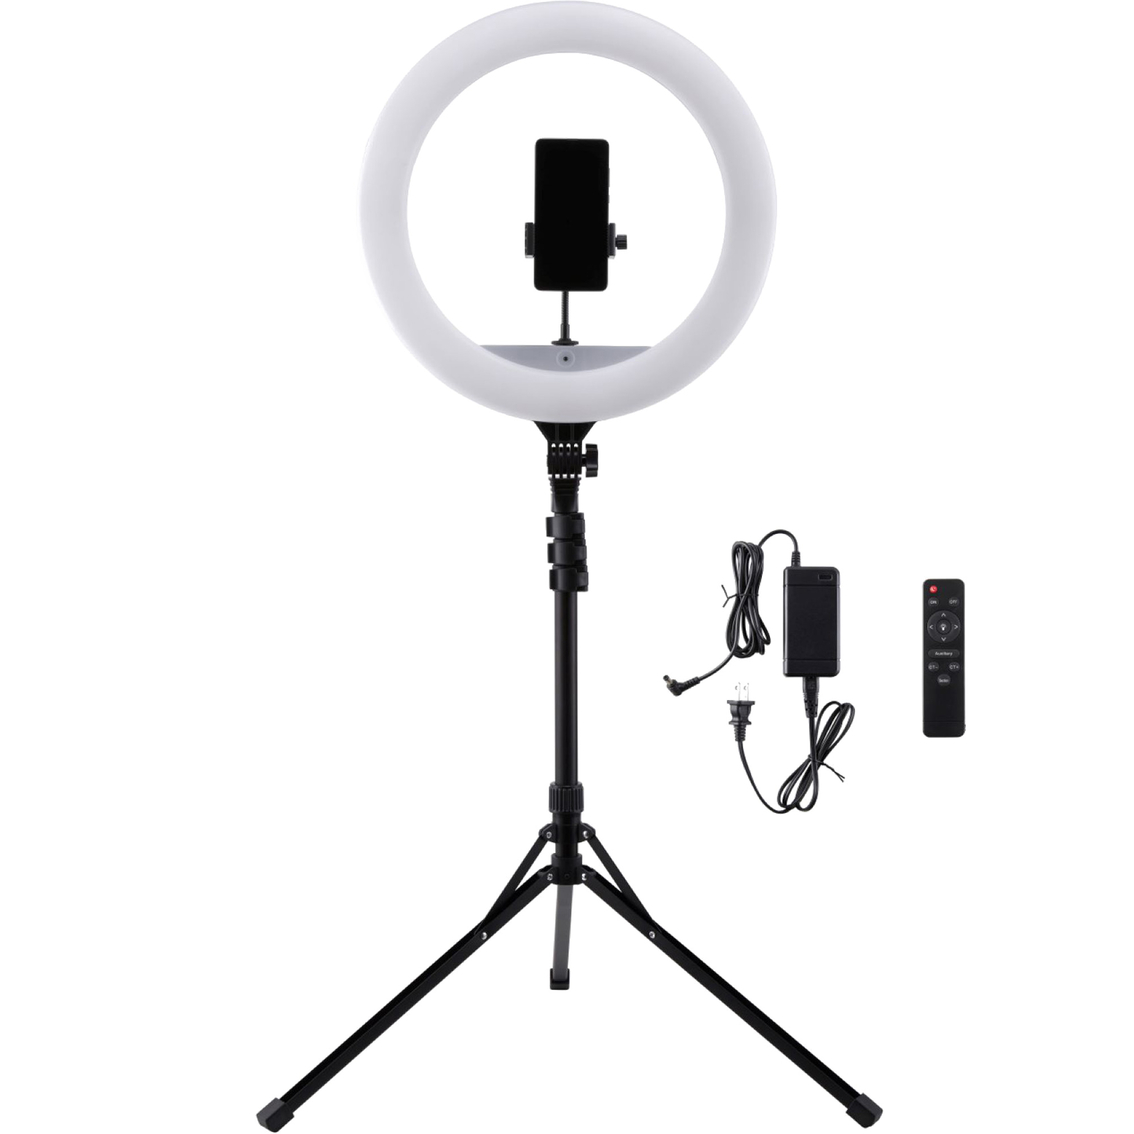 Vivitar 18 in. Ring Light Video Light Kit with 63 in. Stand and Remote - Image 4 of 10